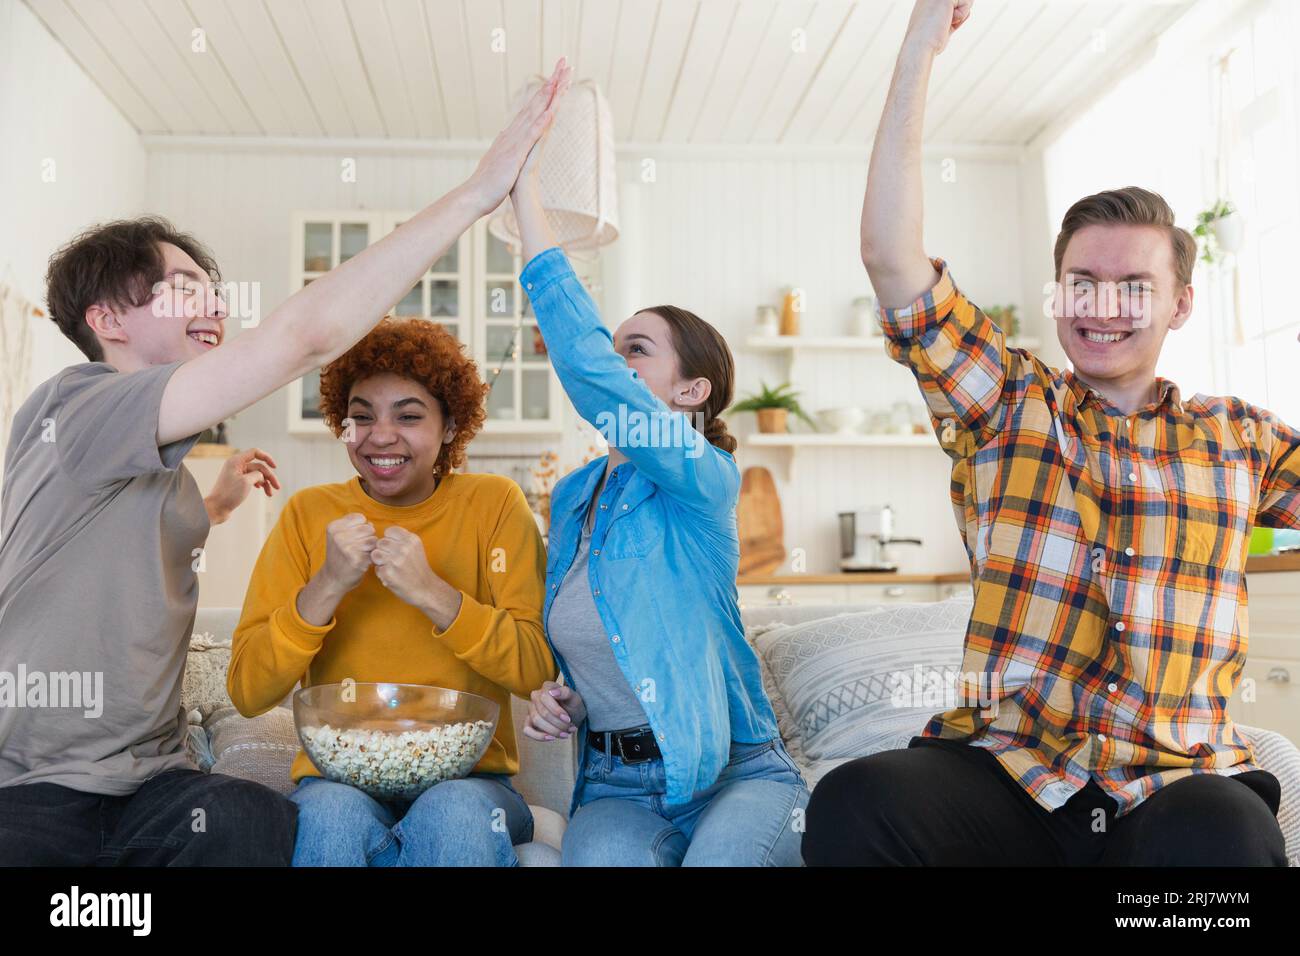 https://c8.alamy.com/comp/2RJ7WYM/group-of-friends-watching-sport-match-soccer-football-game-on-tv-happy-football-fans-celebrating-victory-at-home-friendship-sports-entertainment-concept-diverse-buddies-having-fun-together-at-home-2RJ7WYM.jpg